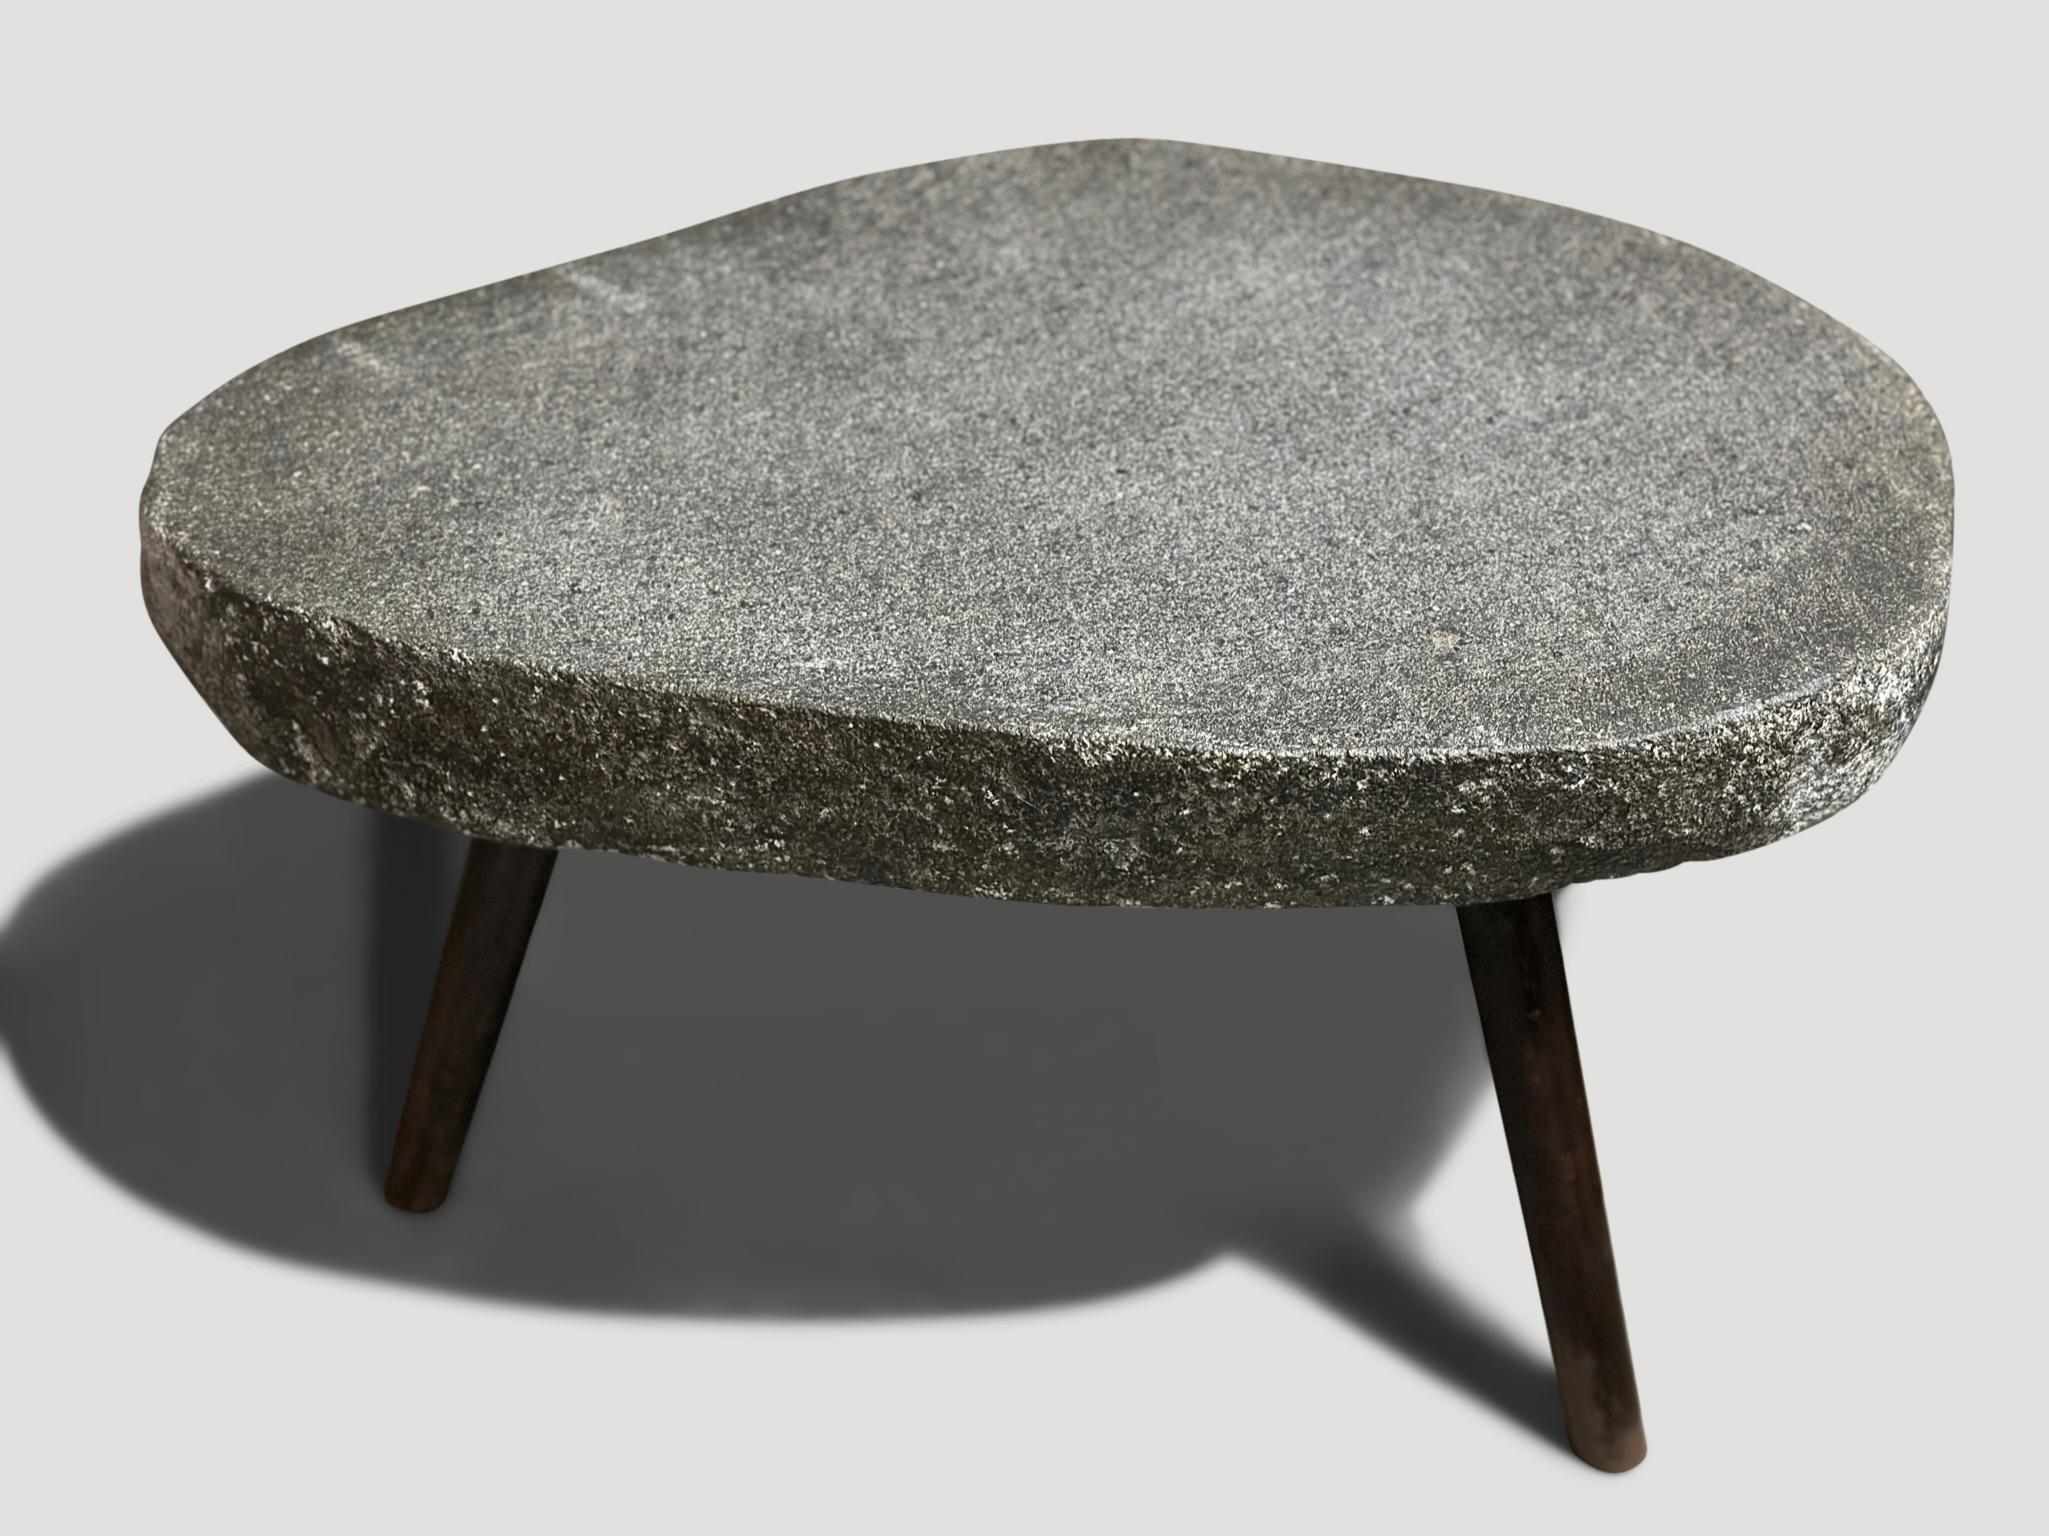 River stone side table from the Ayung River on the island of Bali. We added charred metal legs and polished the 3.5”  top smooth. The sides are left unpolished in contrast. Perfect for poolside. Collection of ten available. All one of a kind. Please